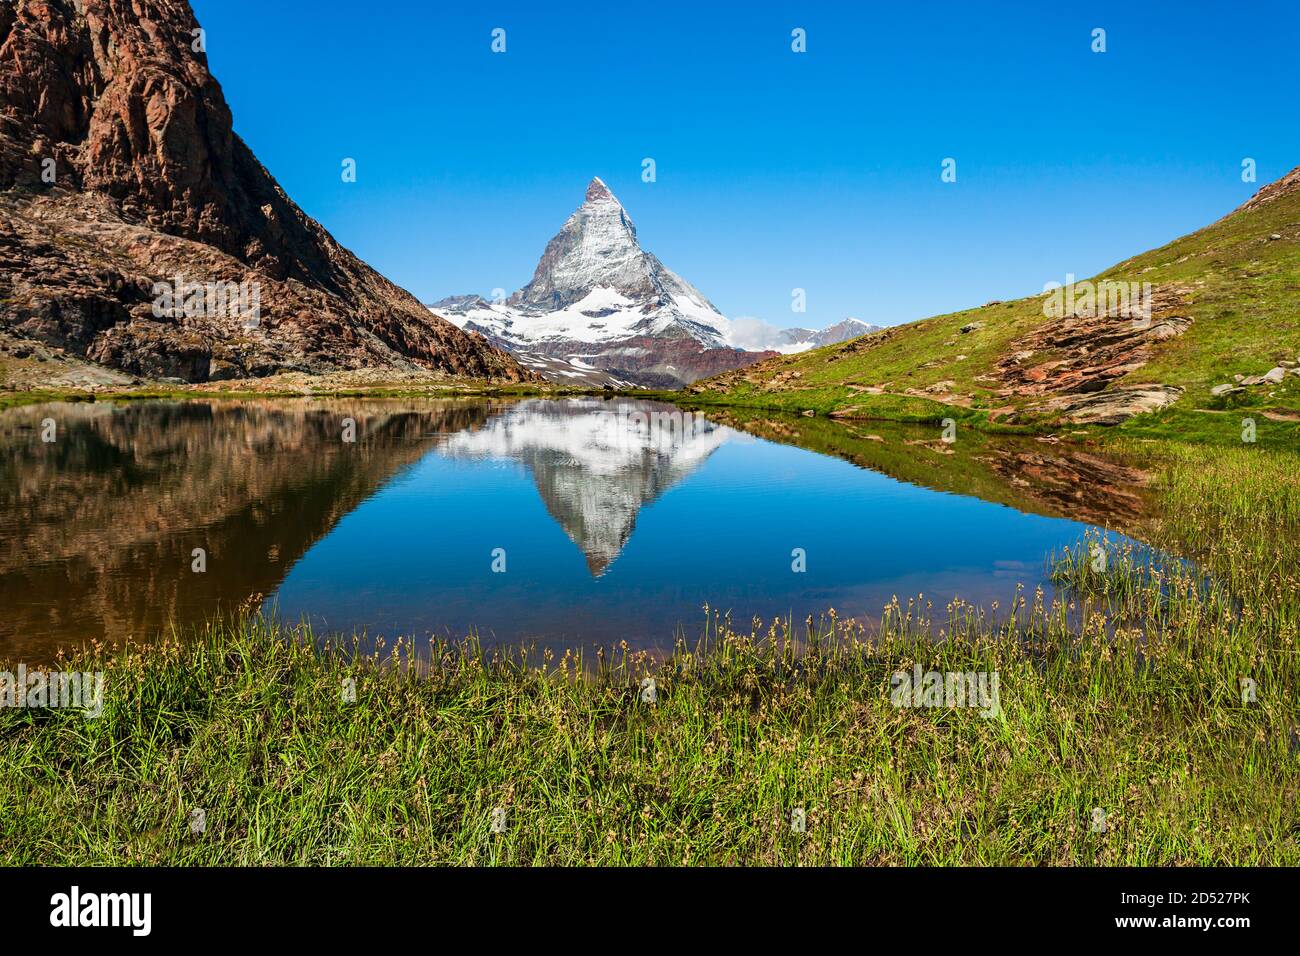 Riffelsee lake and Matterhorn mountain in the Alps, located between Switzerland and Italy Stock Photo